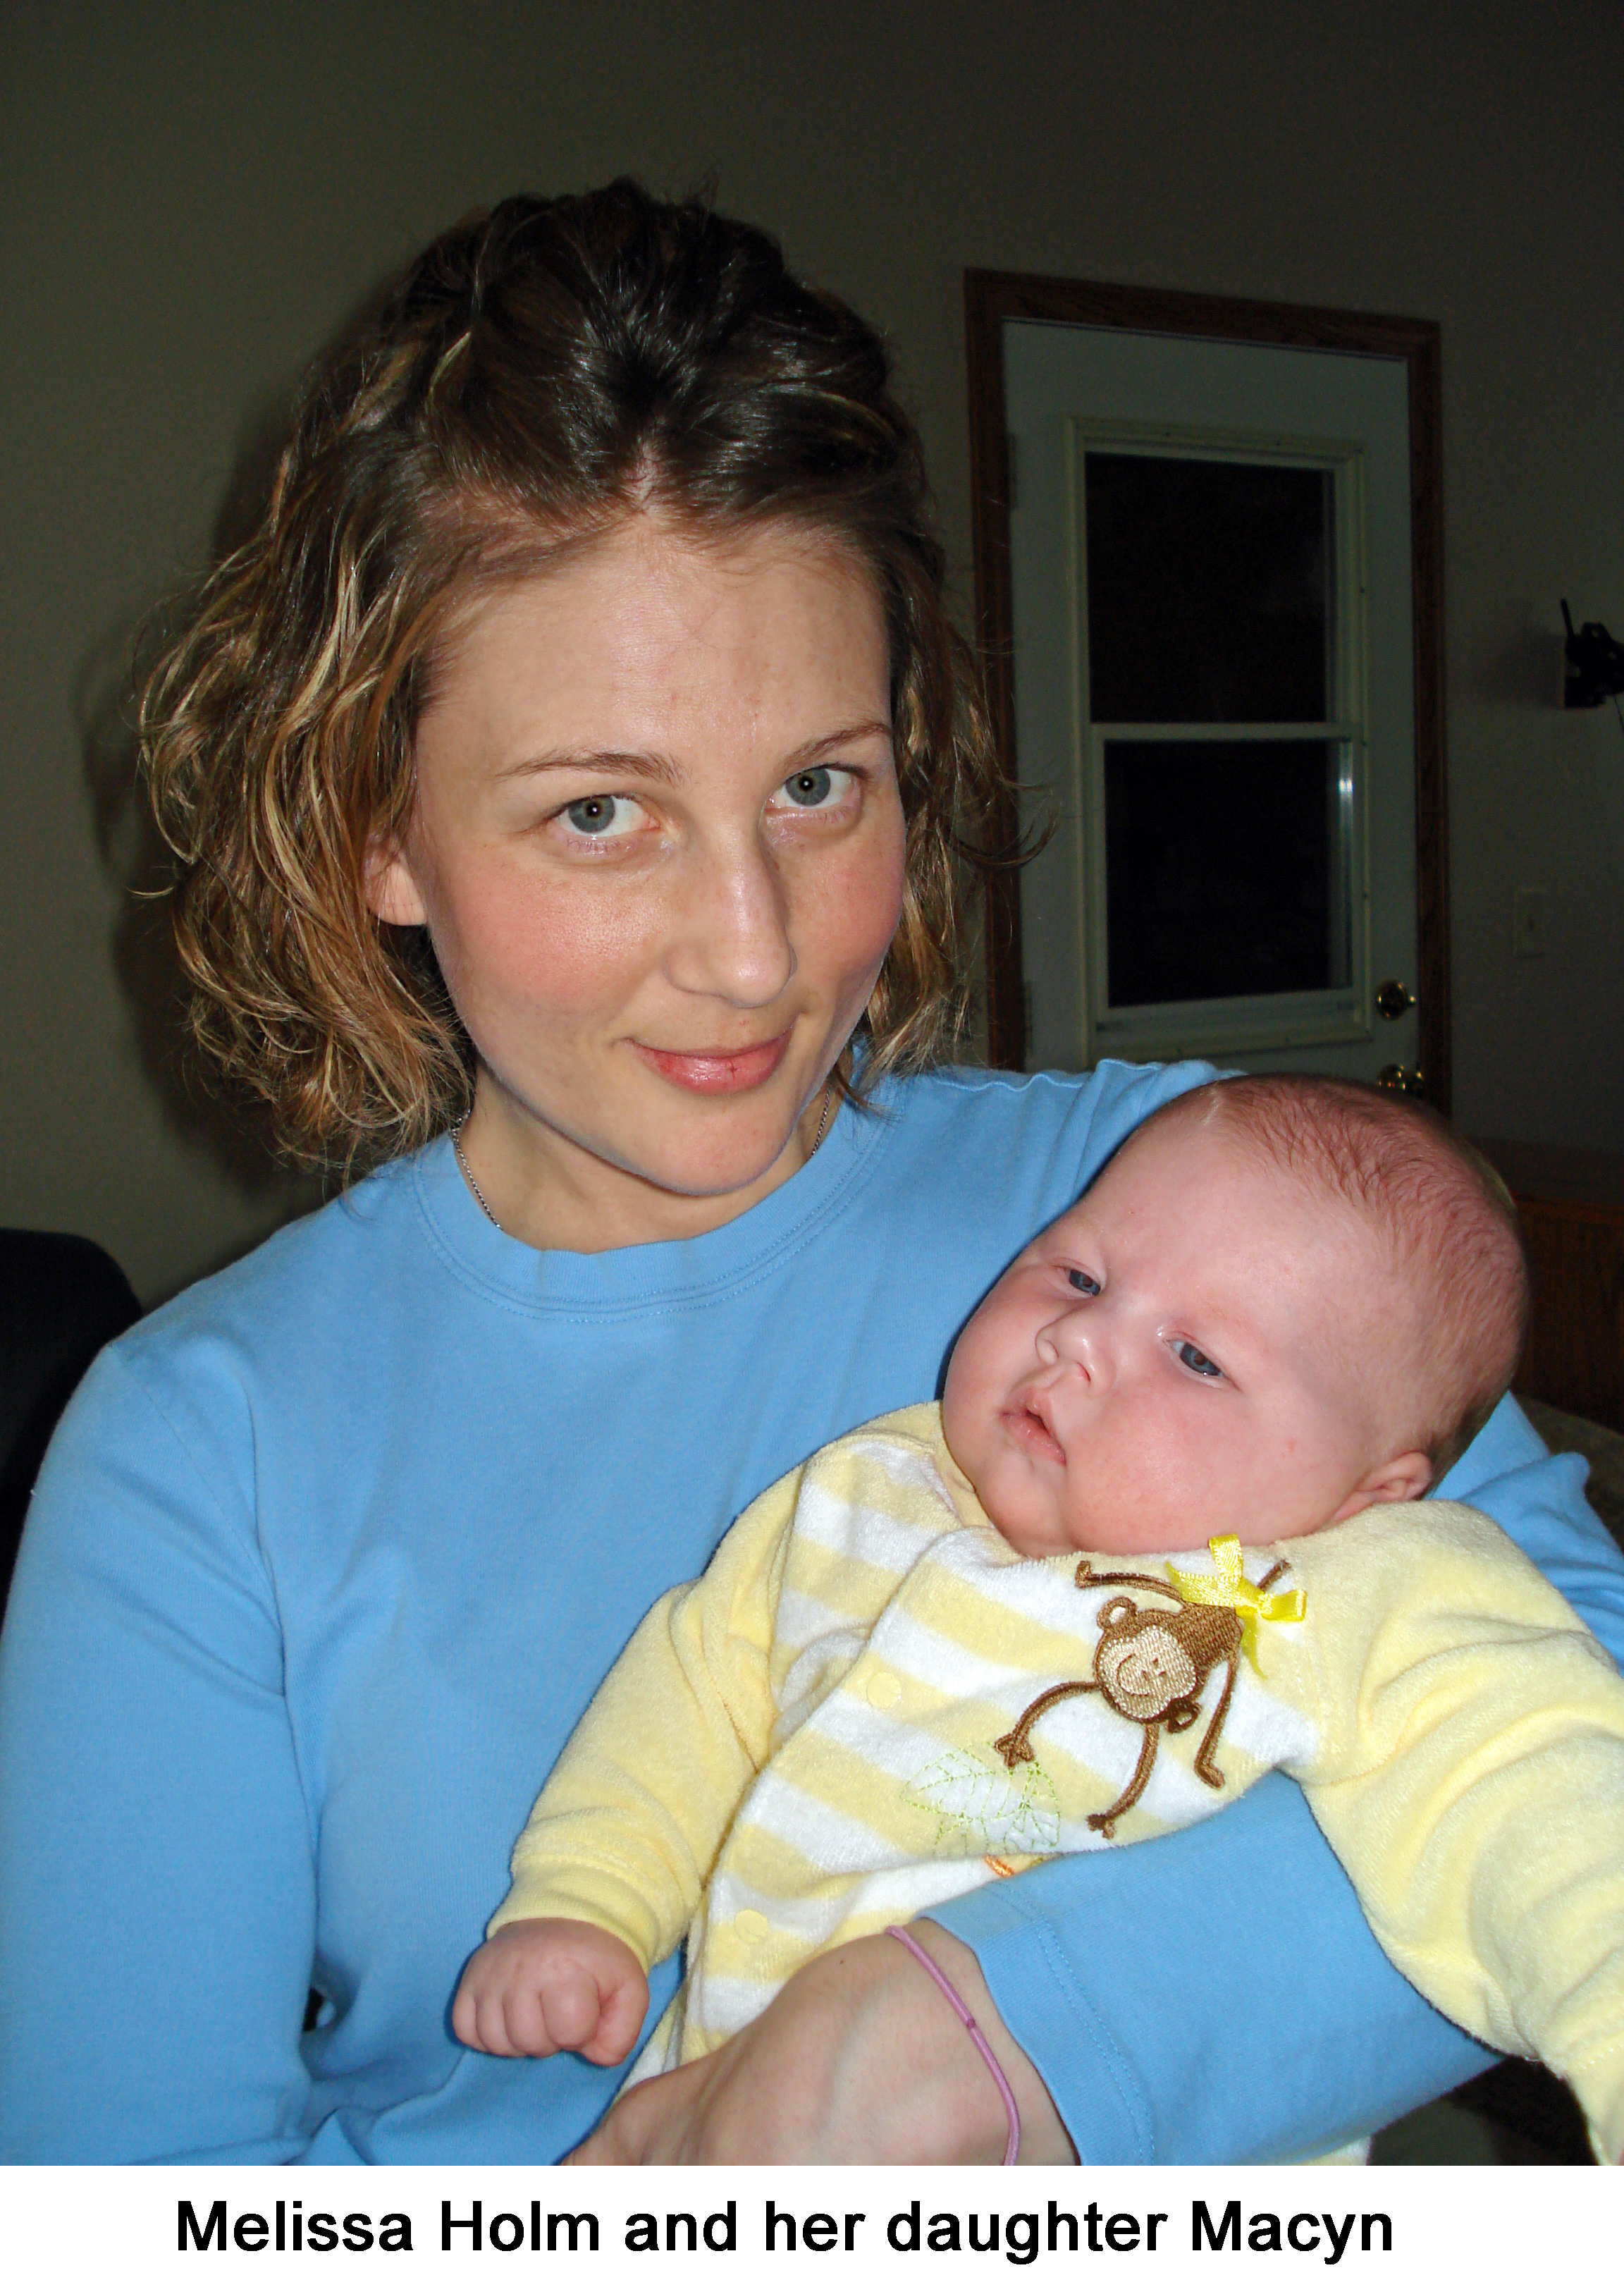 Melissa is looking at the camera and holding a drowsy looking Macyn